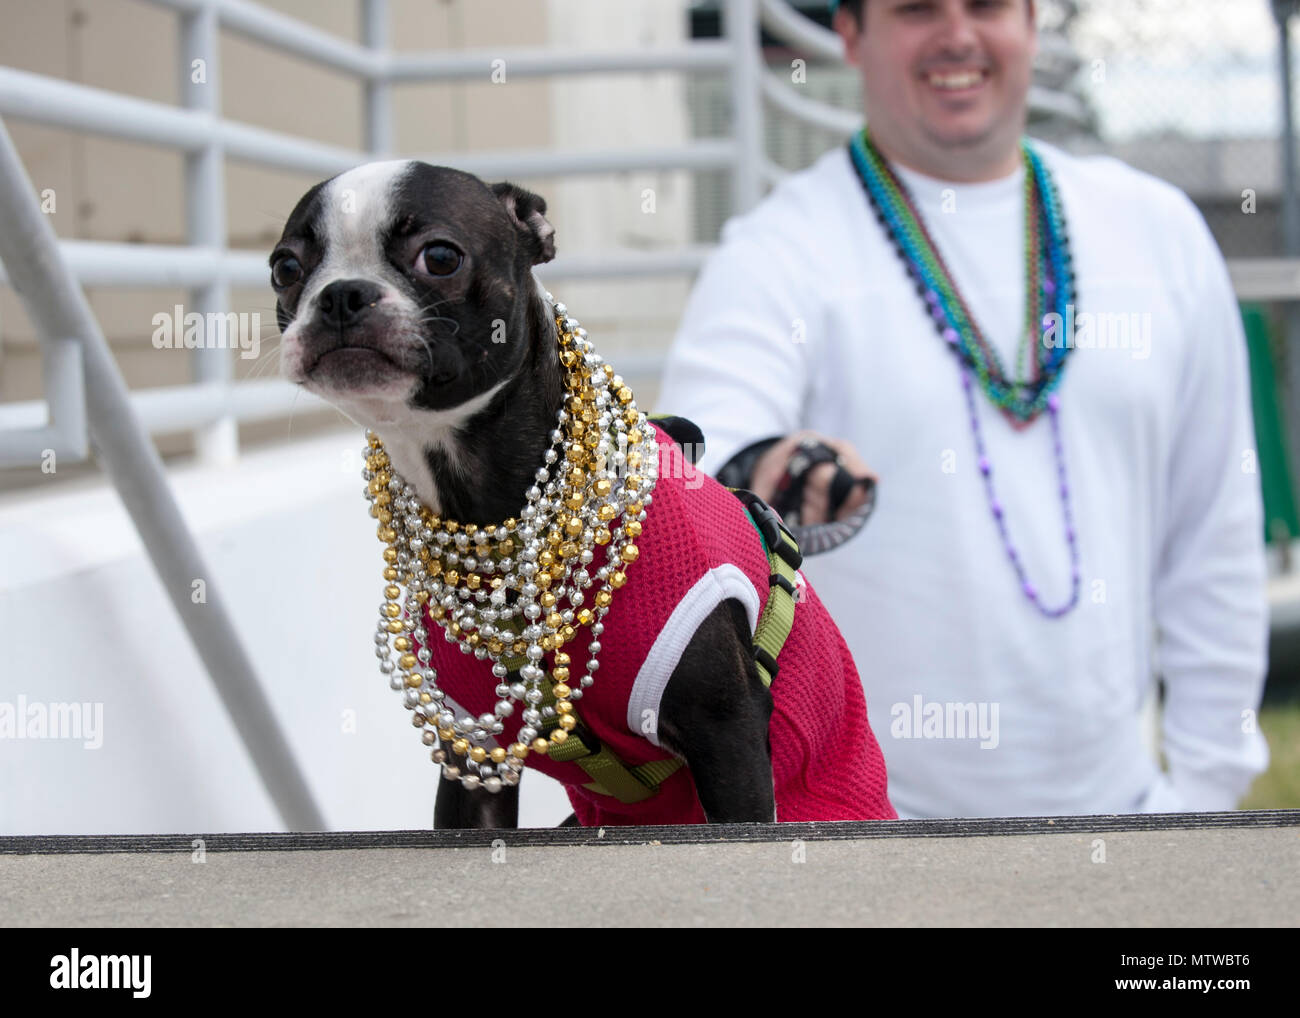 A local dog takes part in the 2017 Jose Gasparilla Pirate Invasion in the Port of Tampa, Fla., Saturday, Jan. 28, 2017. Sharing, trading and wearing beads is a tradition during the parade. U.S. Coast Guard photo by Petty Officer 1st Class Michael De Nyse Stock Photo